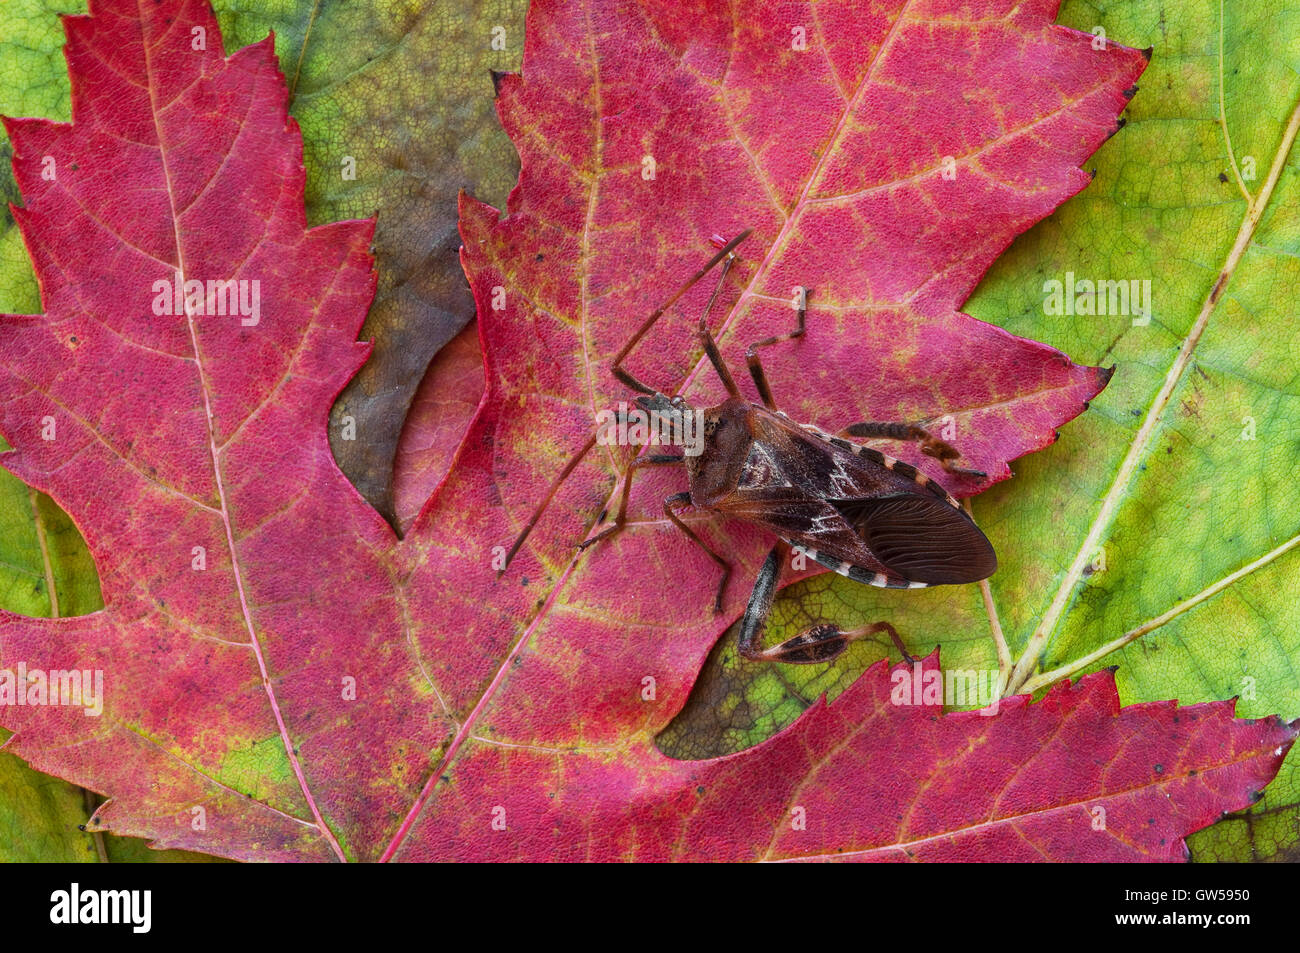 Leaf-footed bug,(Leptoglossus occidentalis) on Silver Maple leaf (Acer saccharinum), USA, by Skip Moody/Dembinsky Photo Assoc Foto Stock